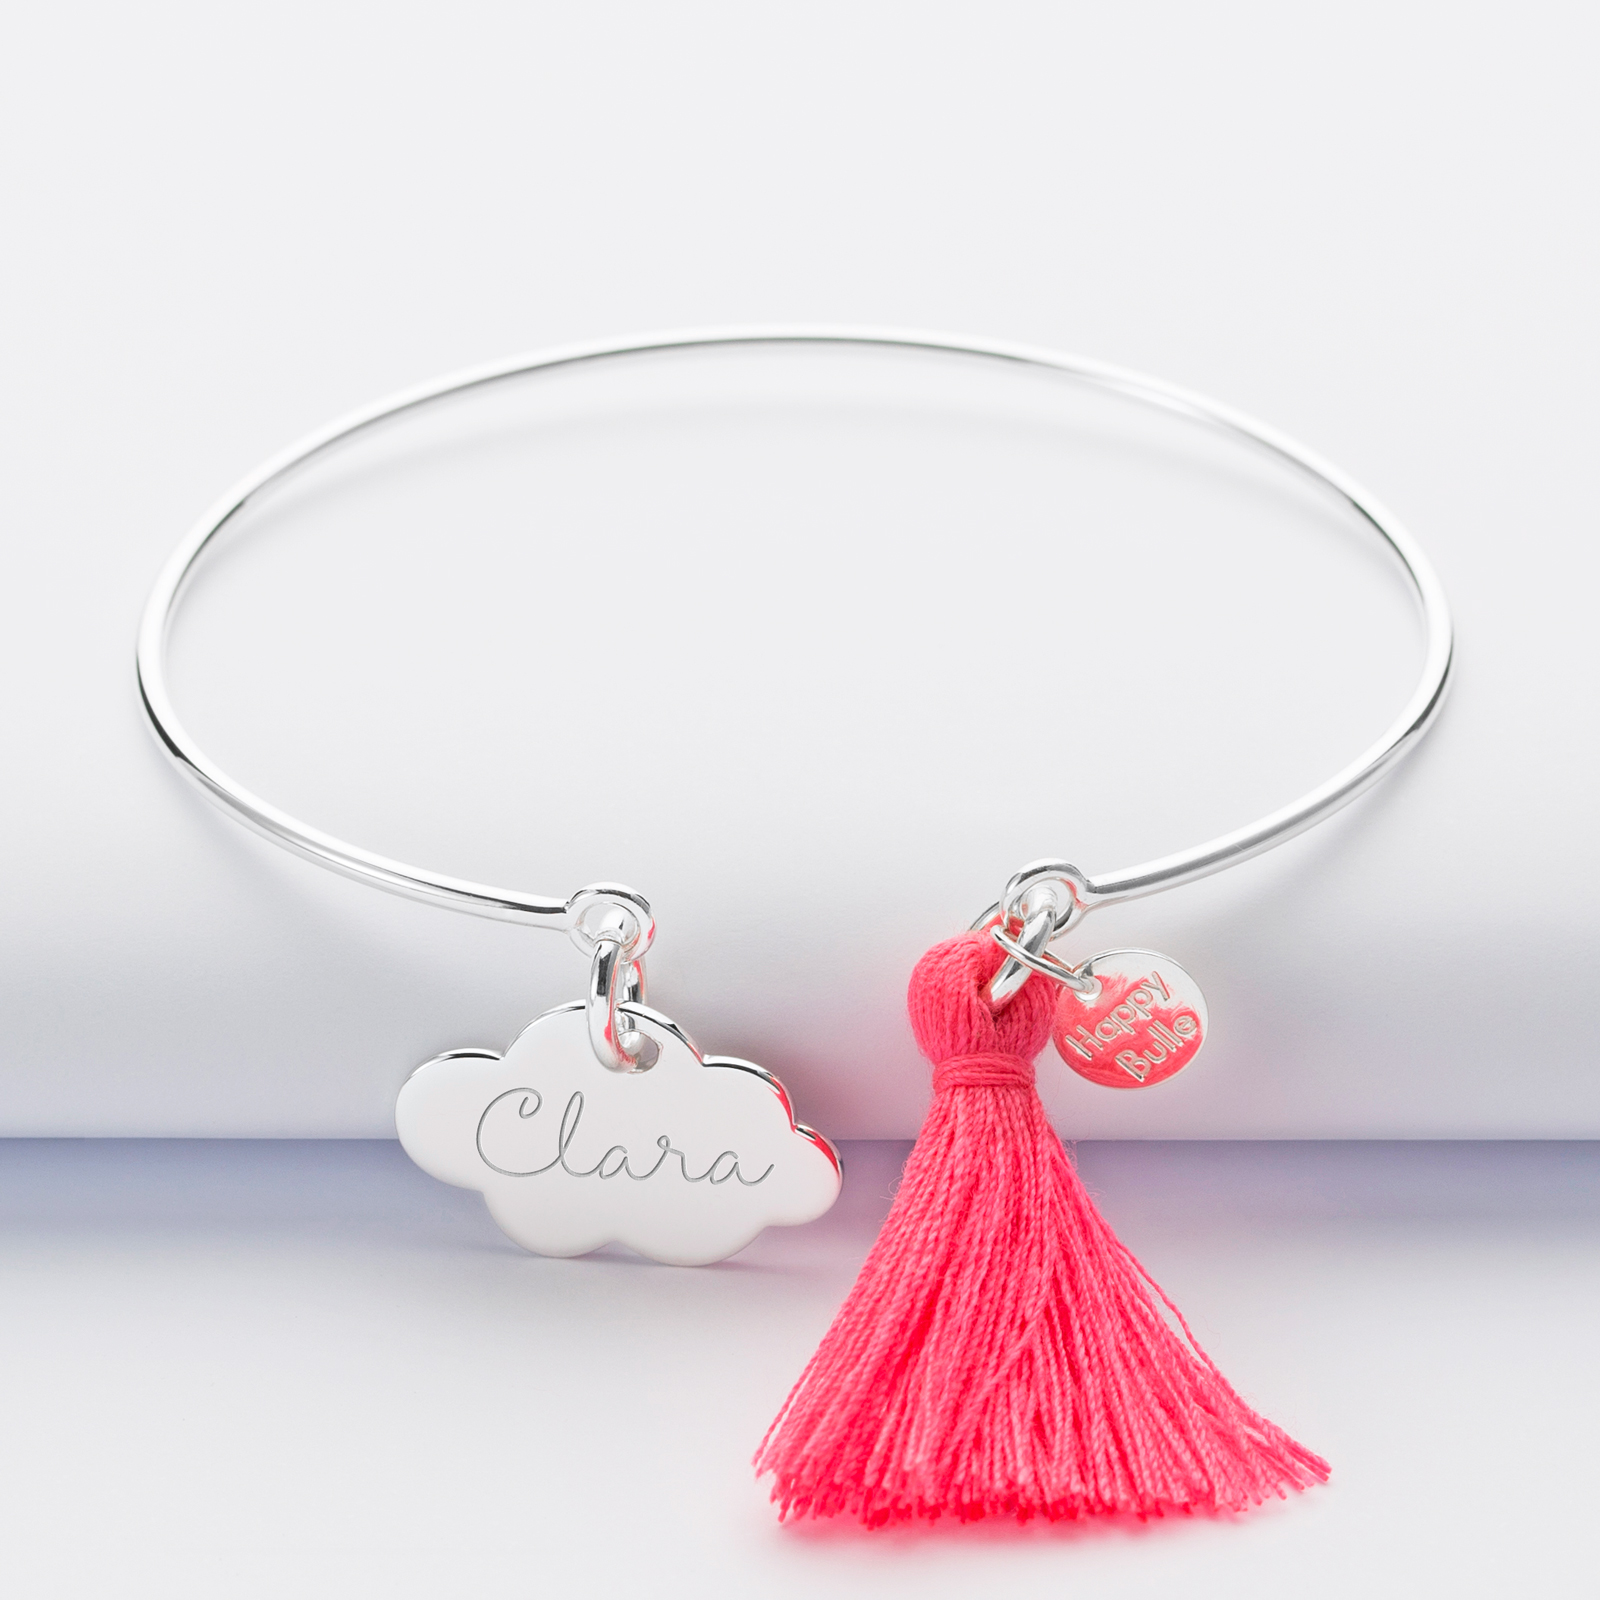 Personalised silver and tassel bangle bracelet and engraved cloud medallion 20x14mm - name 1